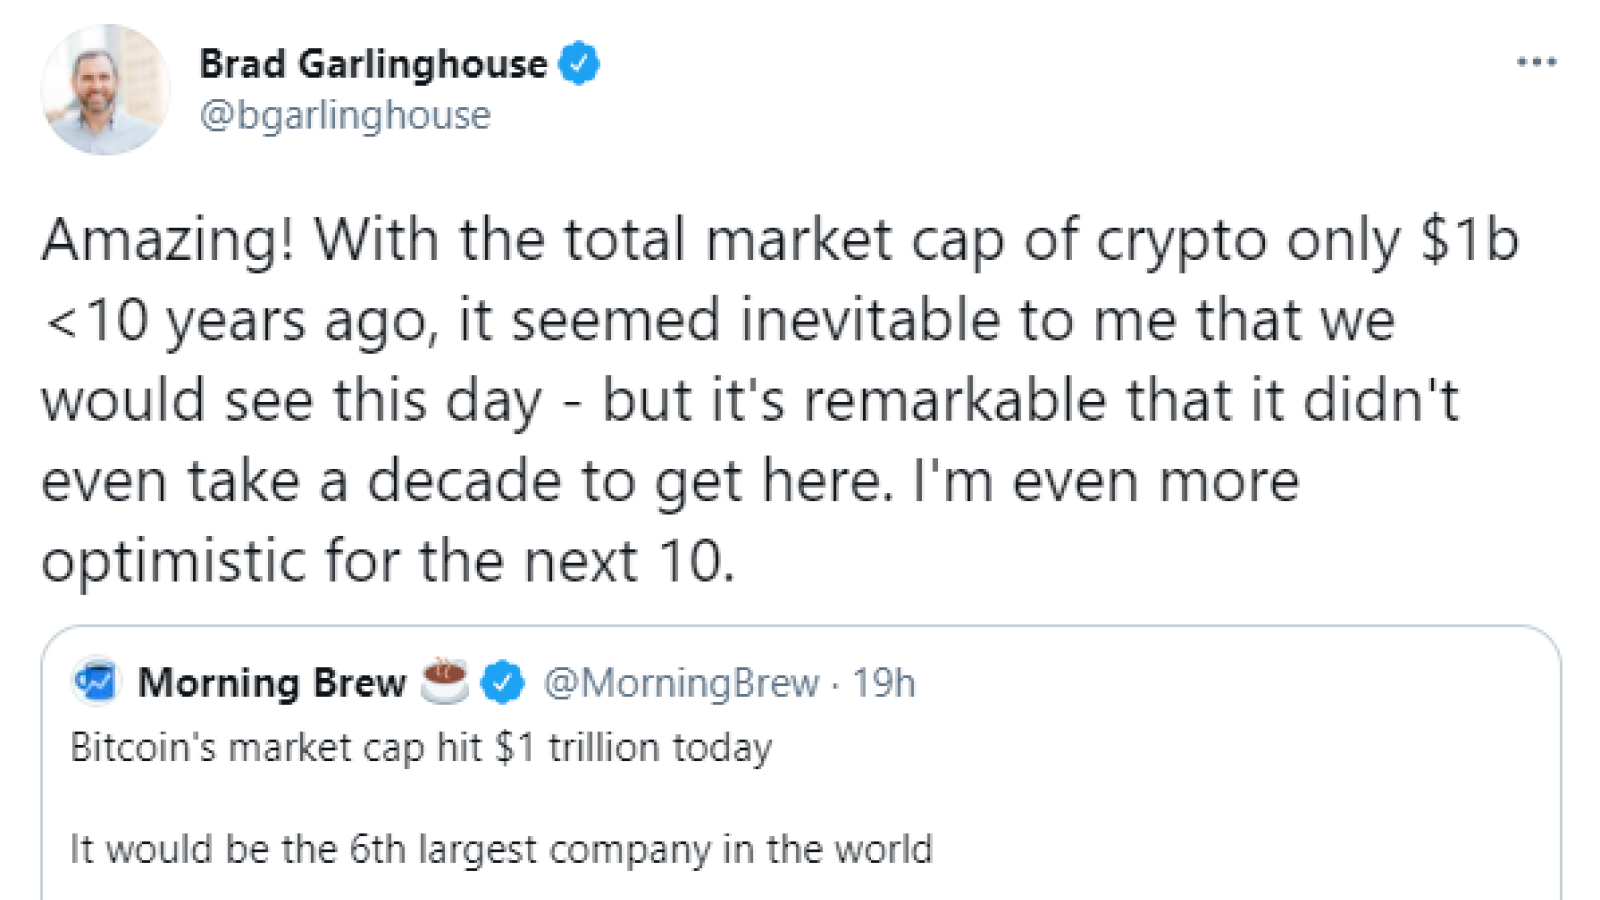 Ripple's Garlinghouse isn't surprised by $1T in Bitcoin's marketcap